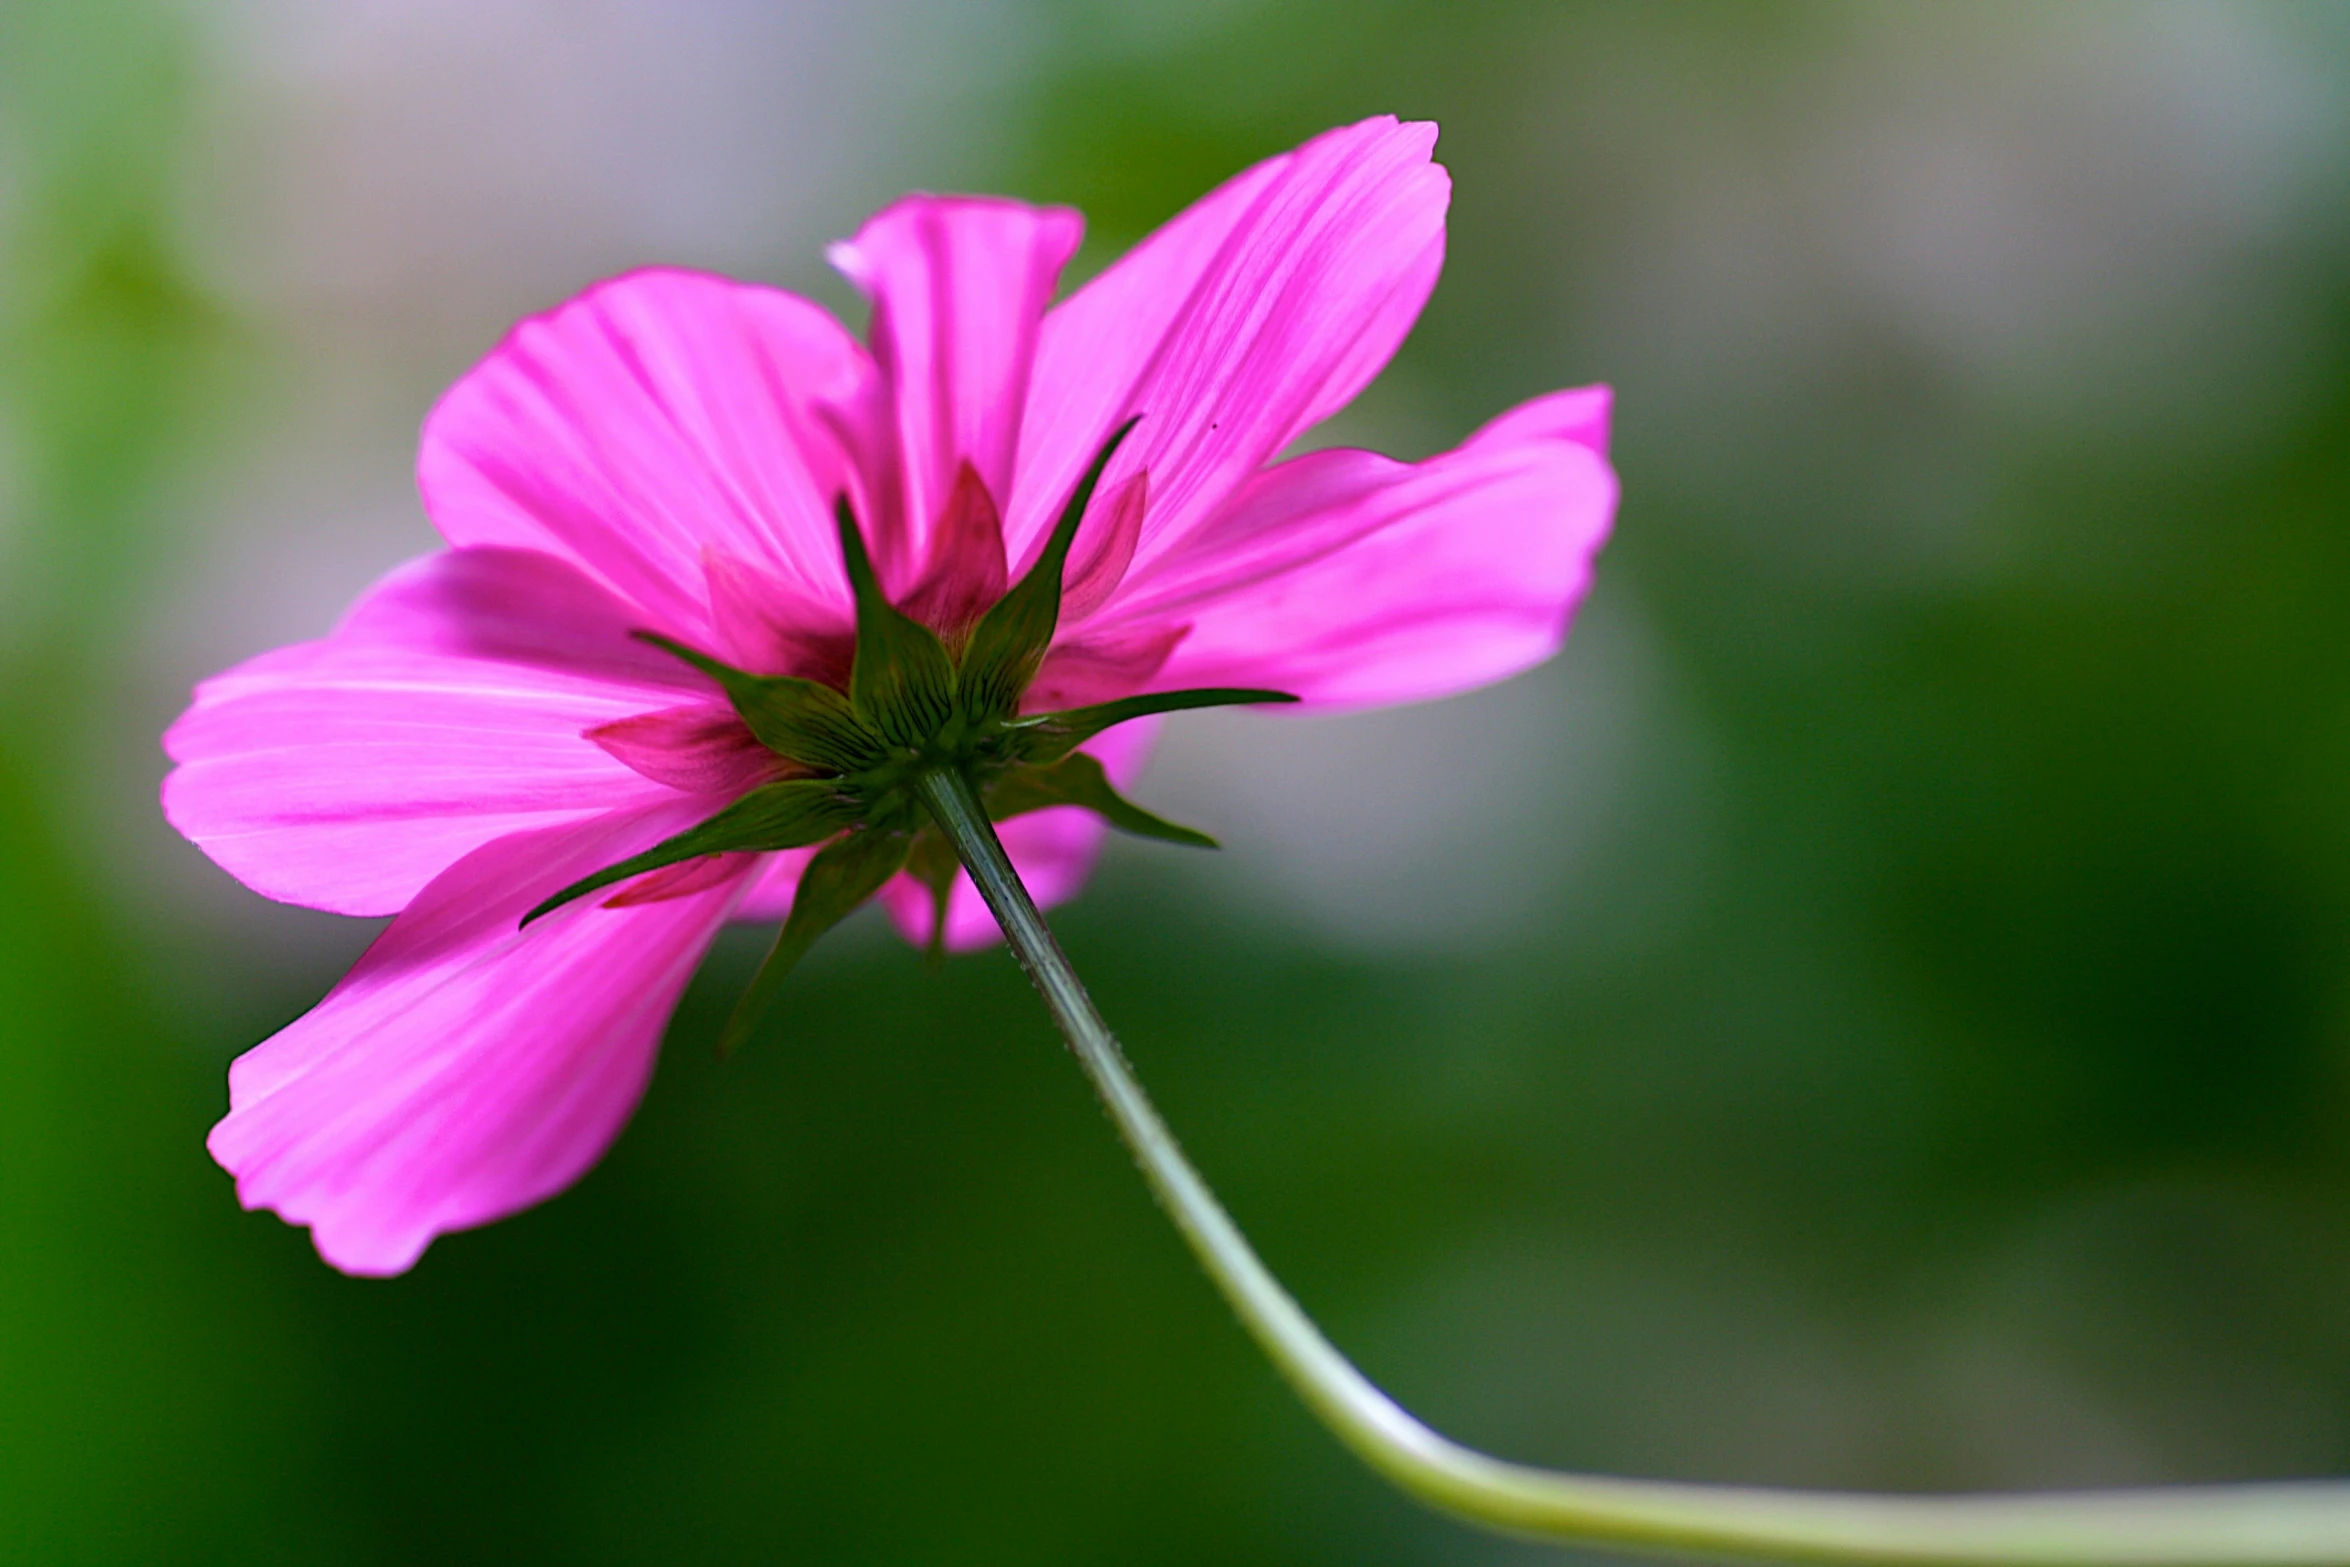 the small pink flower is in focus on the green background